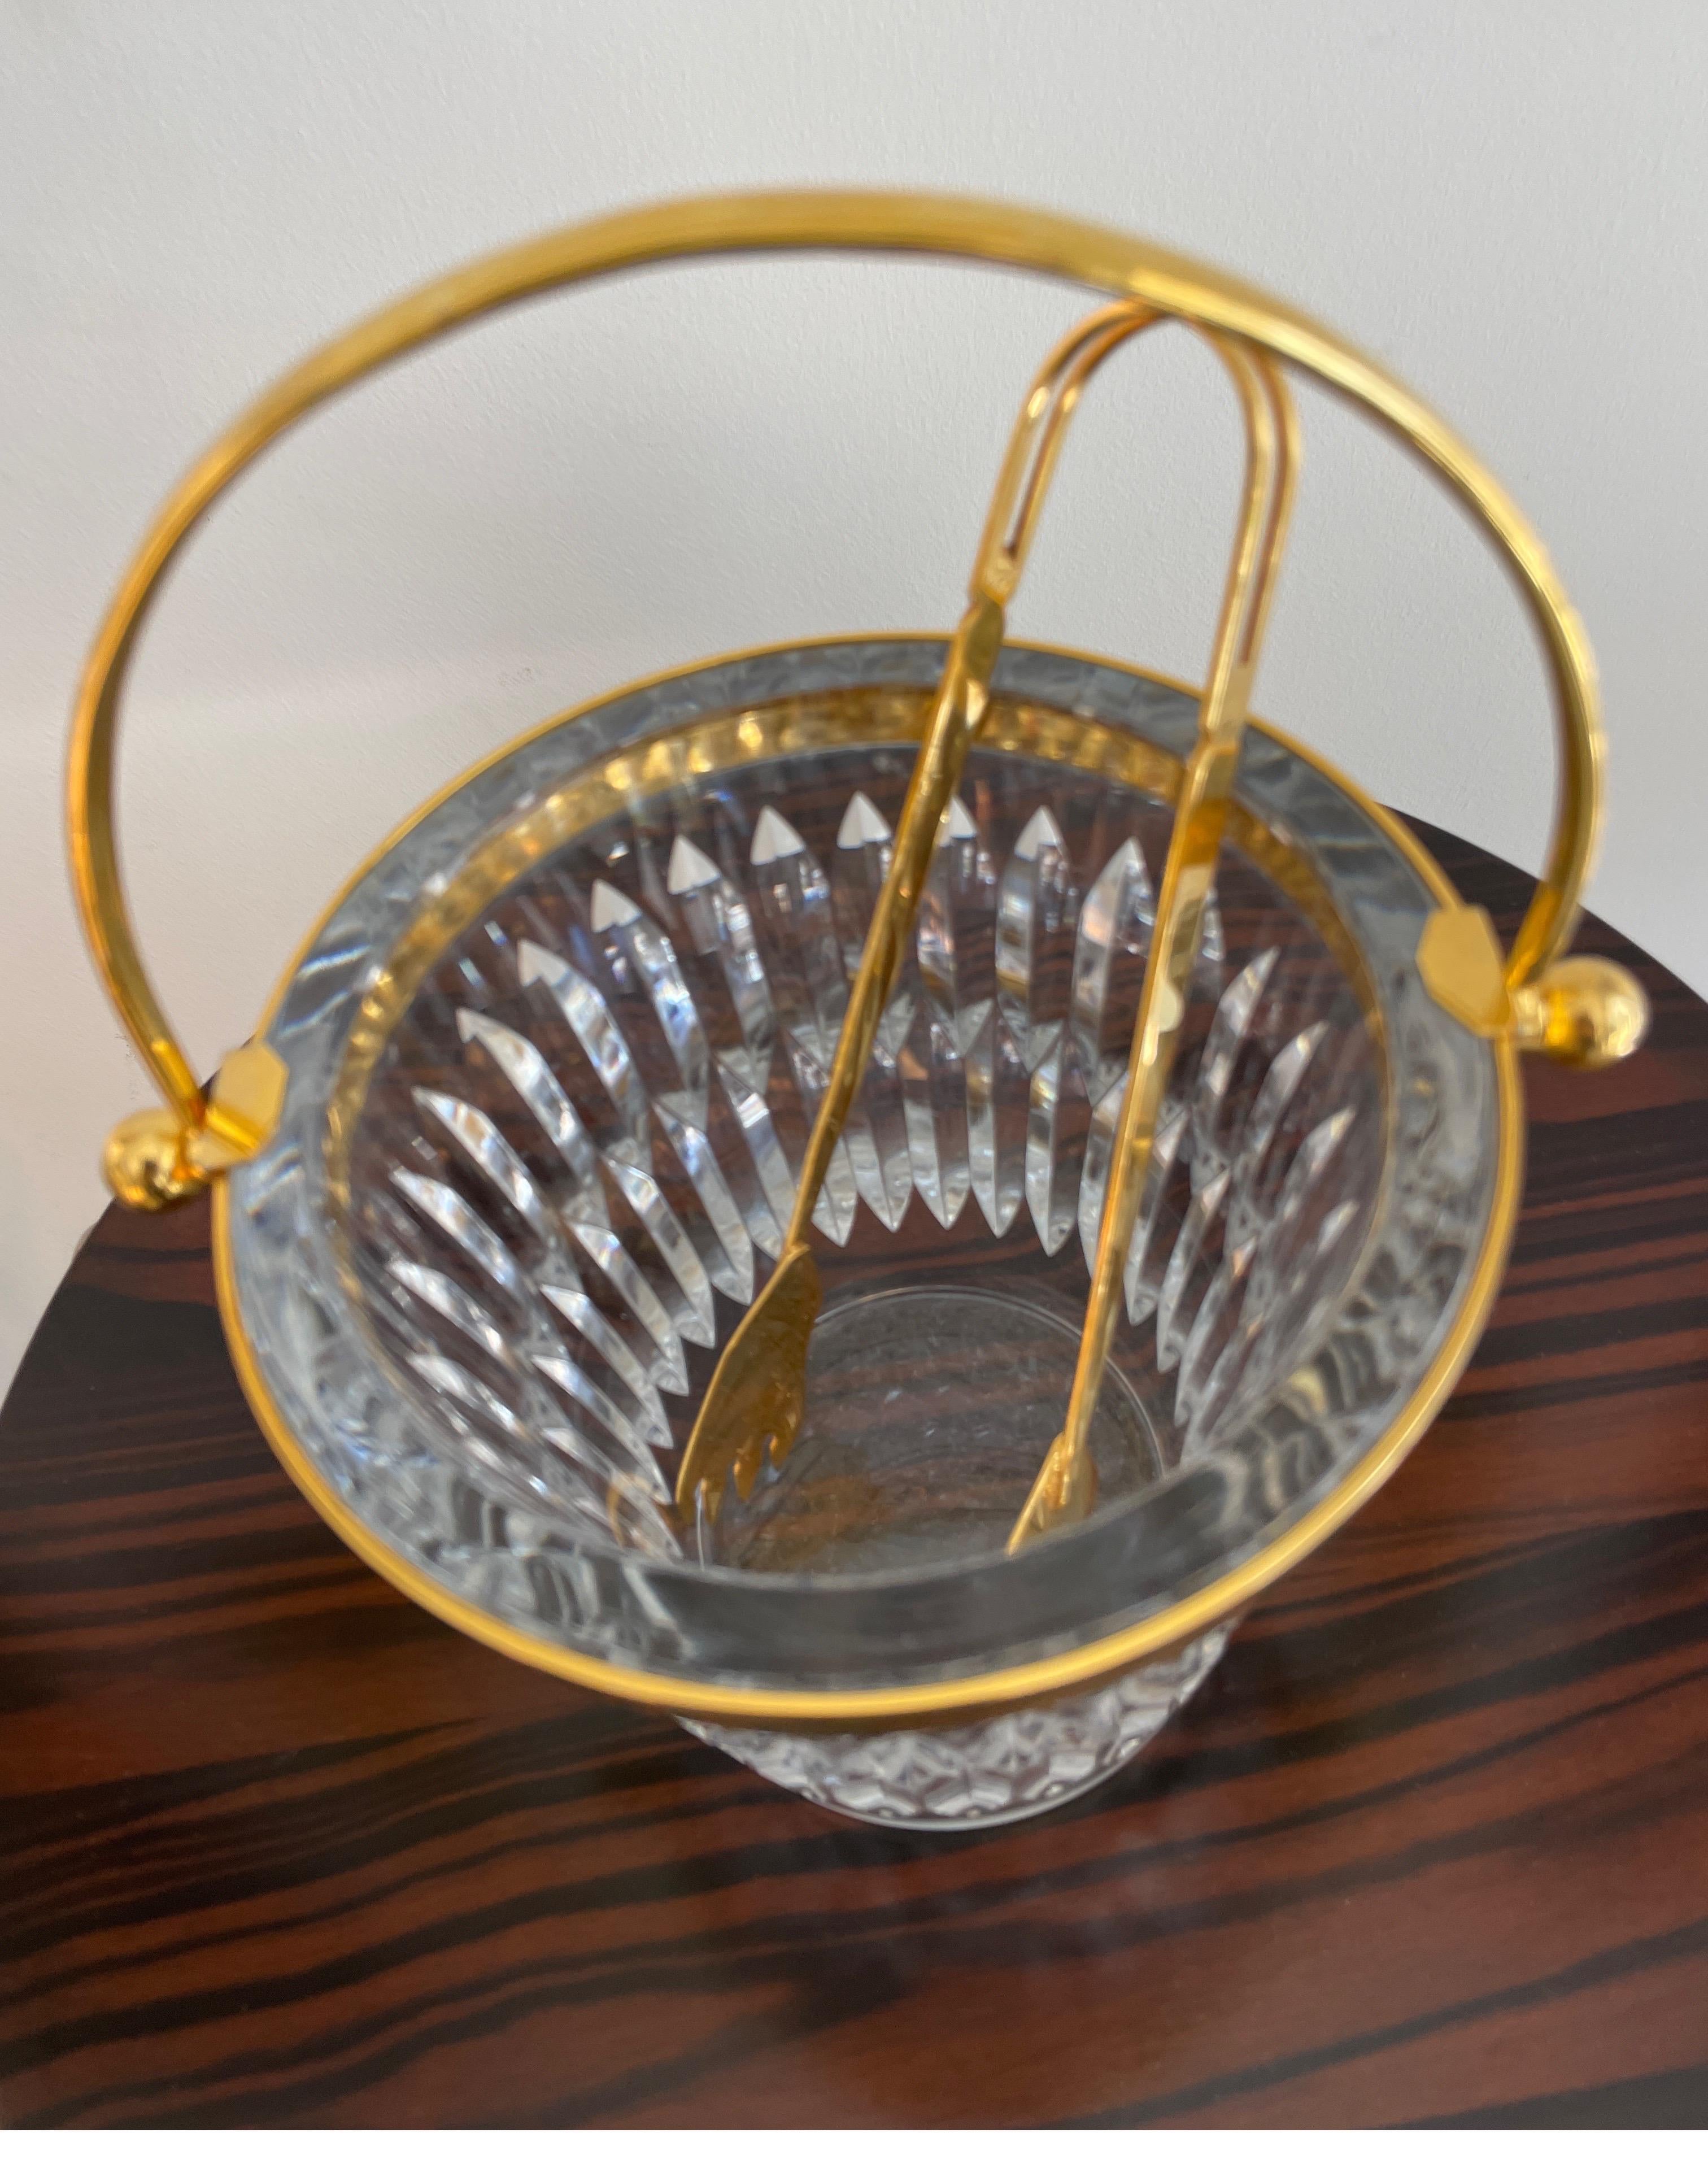 Very chic Baccarat crystal Dore trimmed ice bucket & Tong. This special ice bucket will glimmer in any setting.